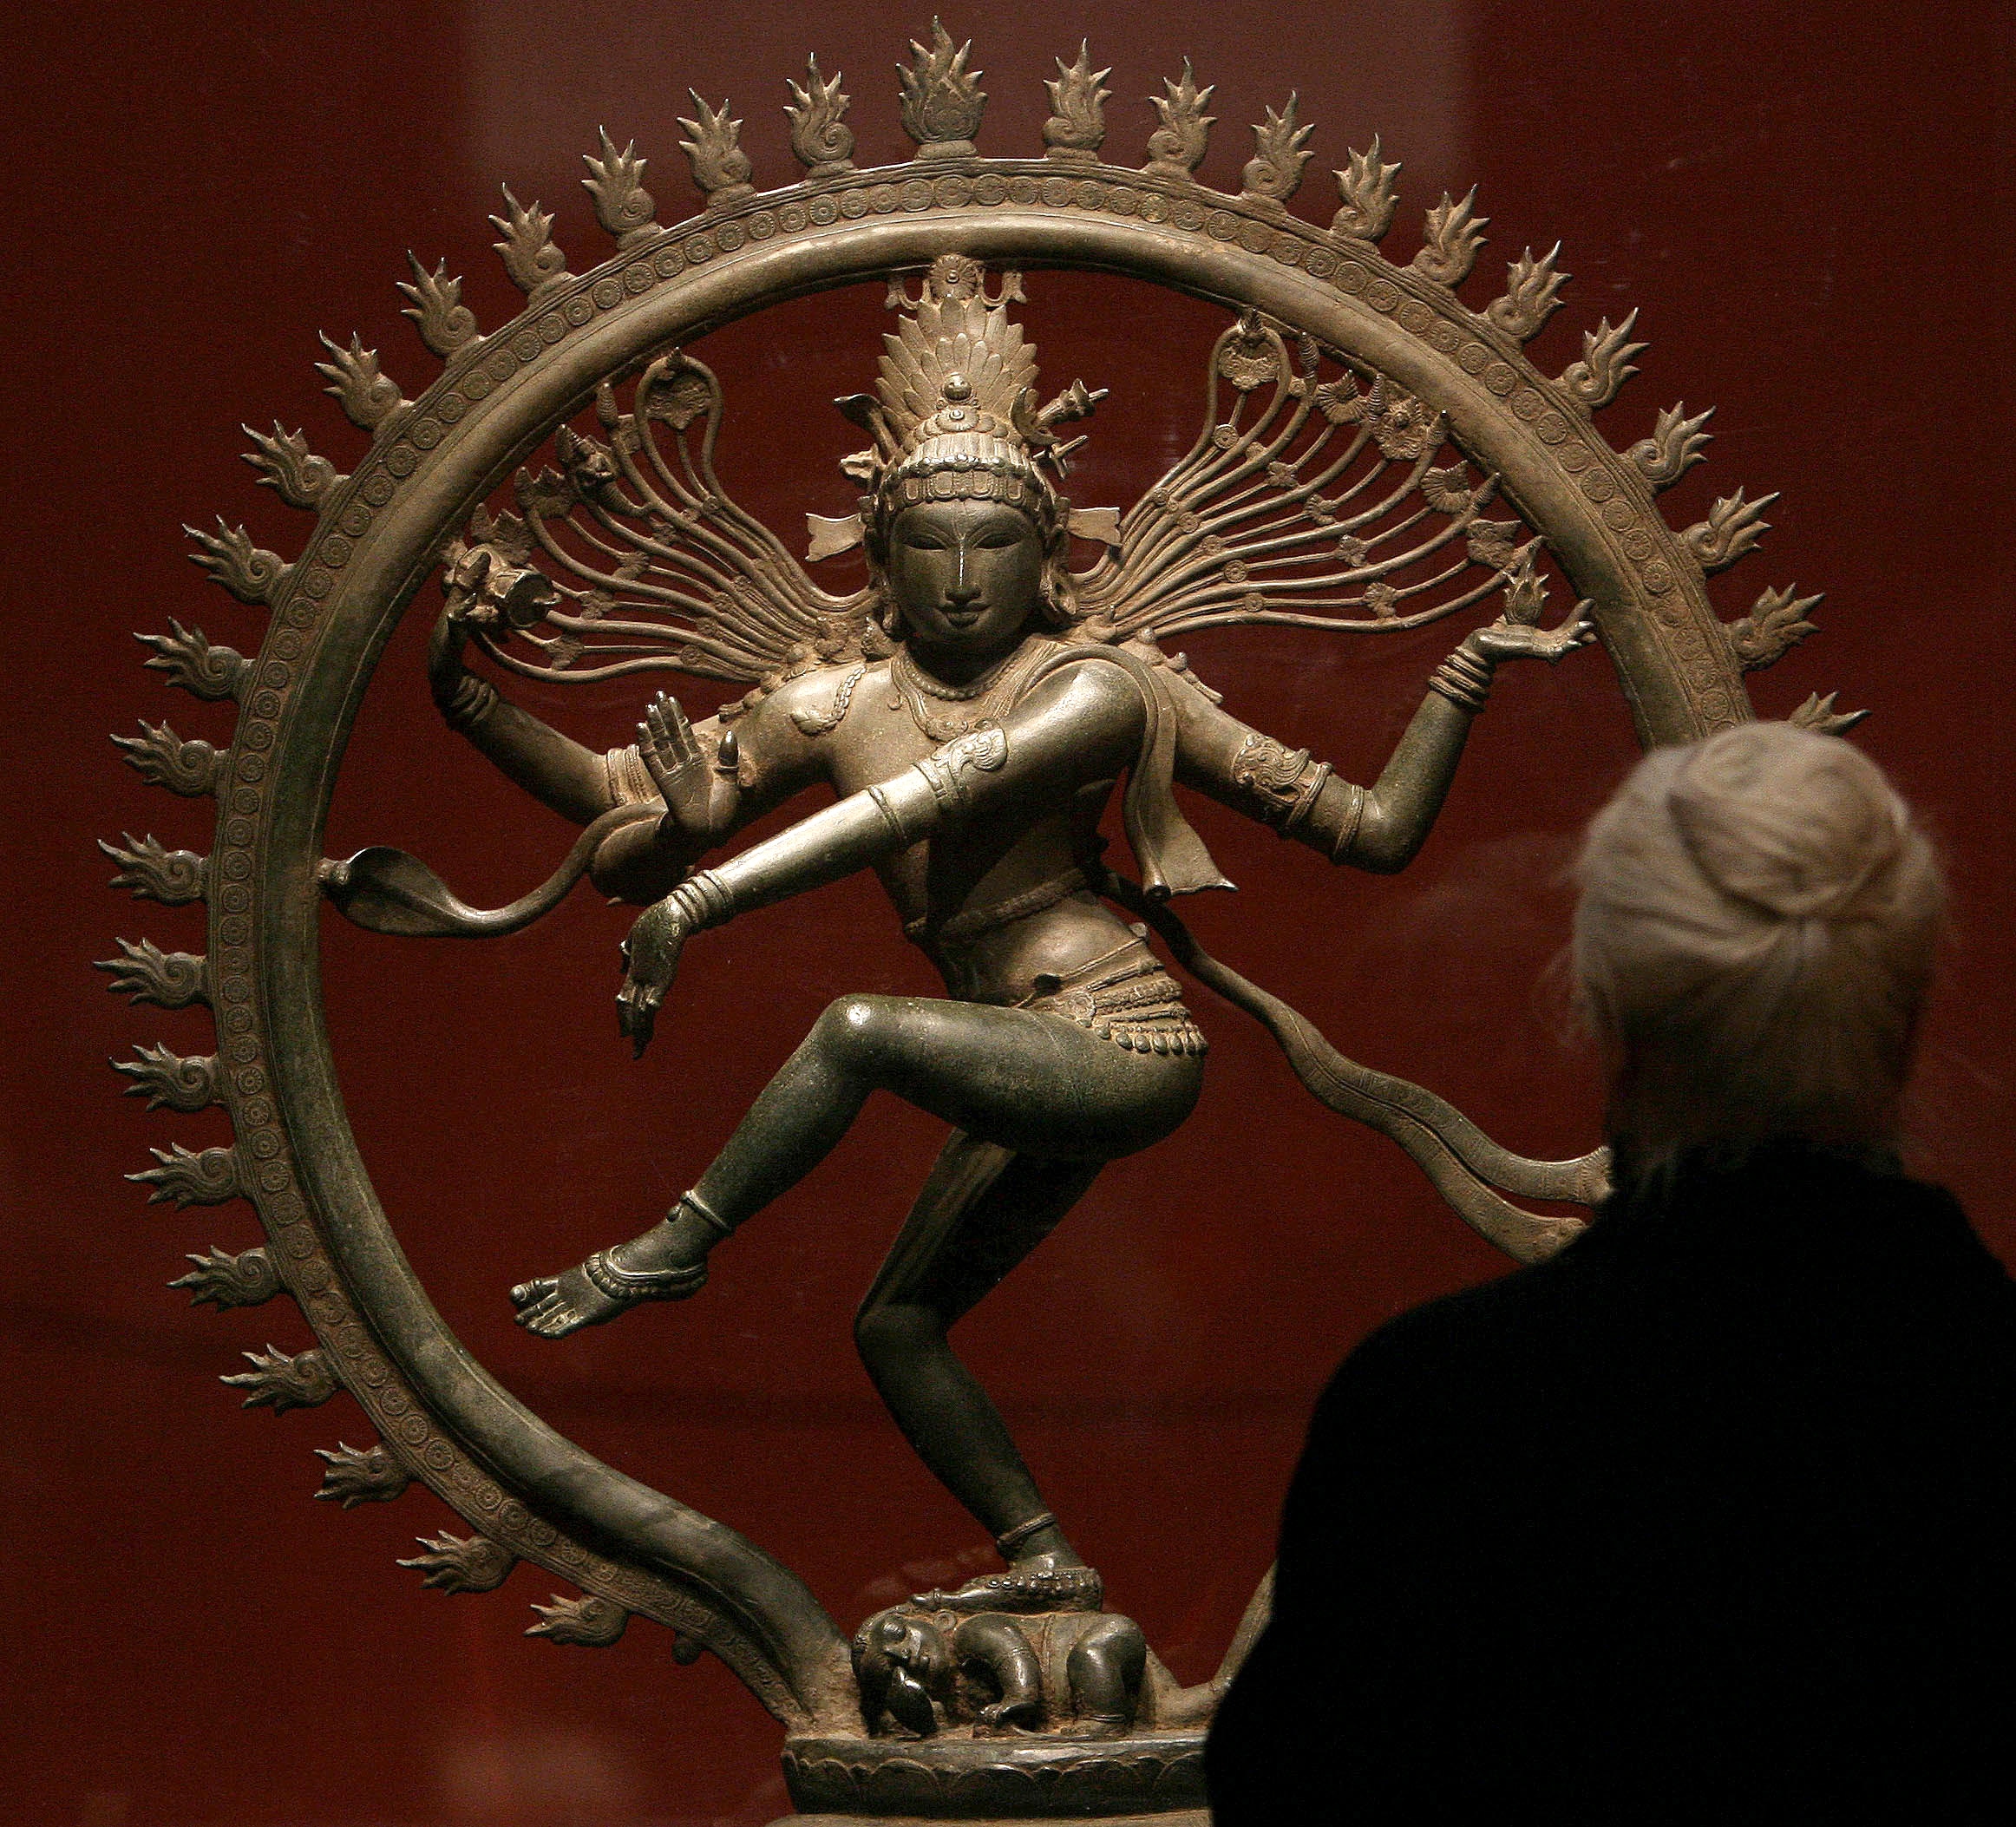 A visitor admires an Indian sculpture during an exhibition on Chola bronzes at the Royal Academy of Arts in central London. (Reuters)